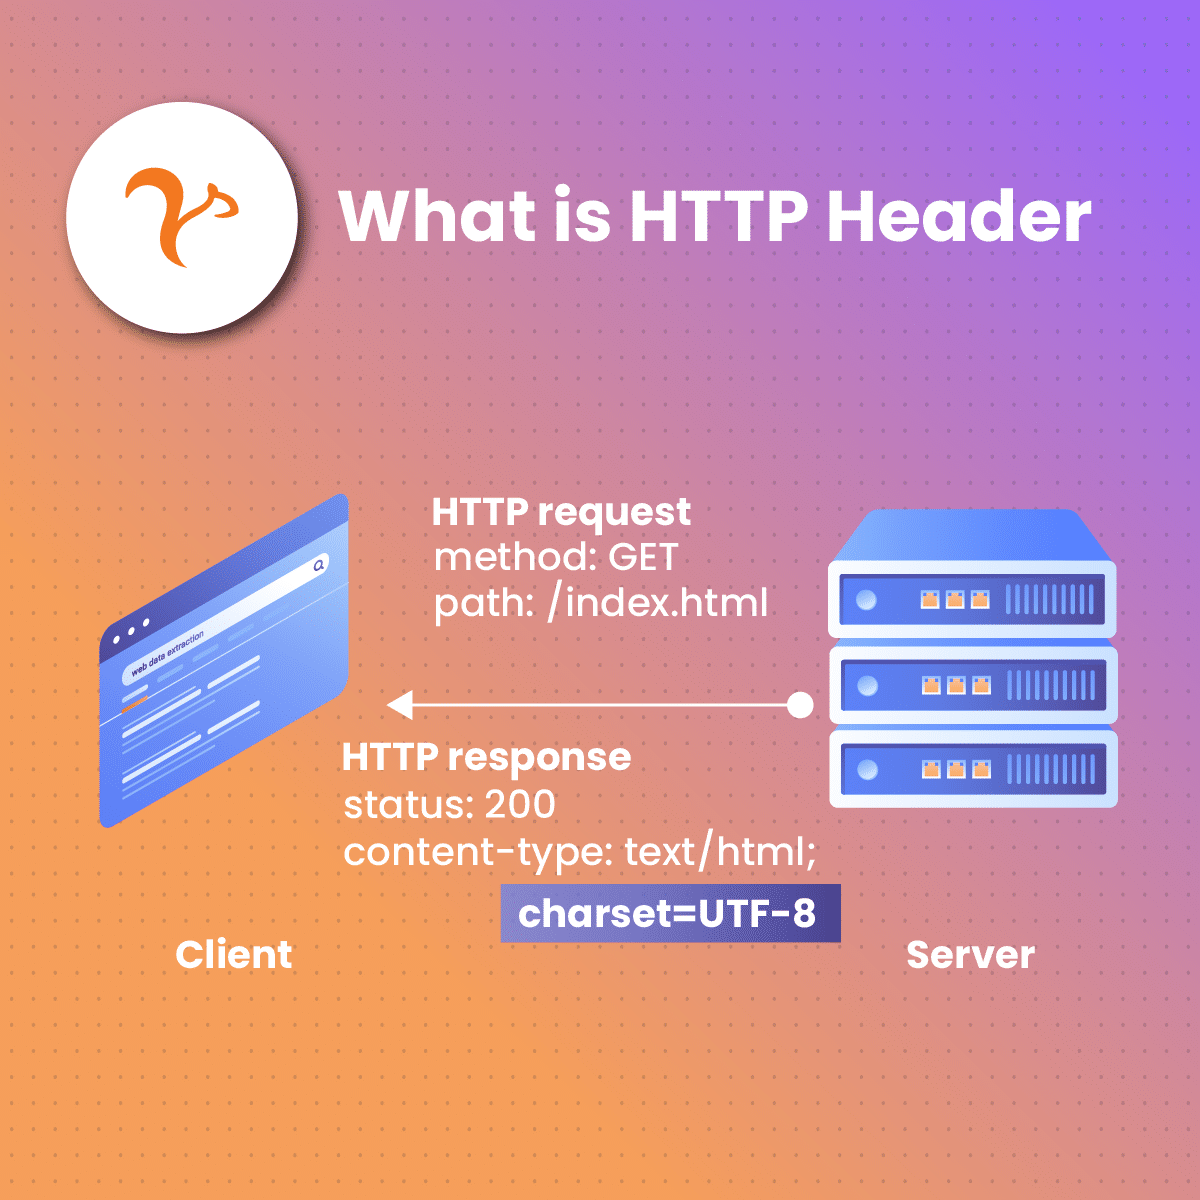 What is HTTP Header